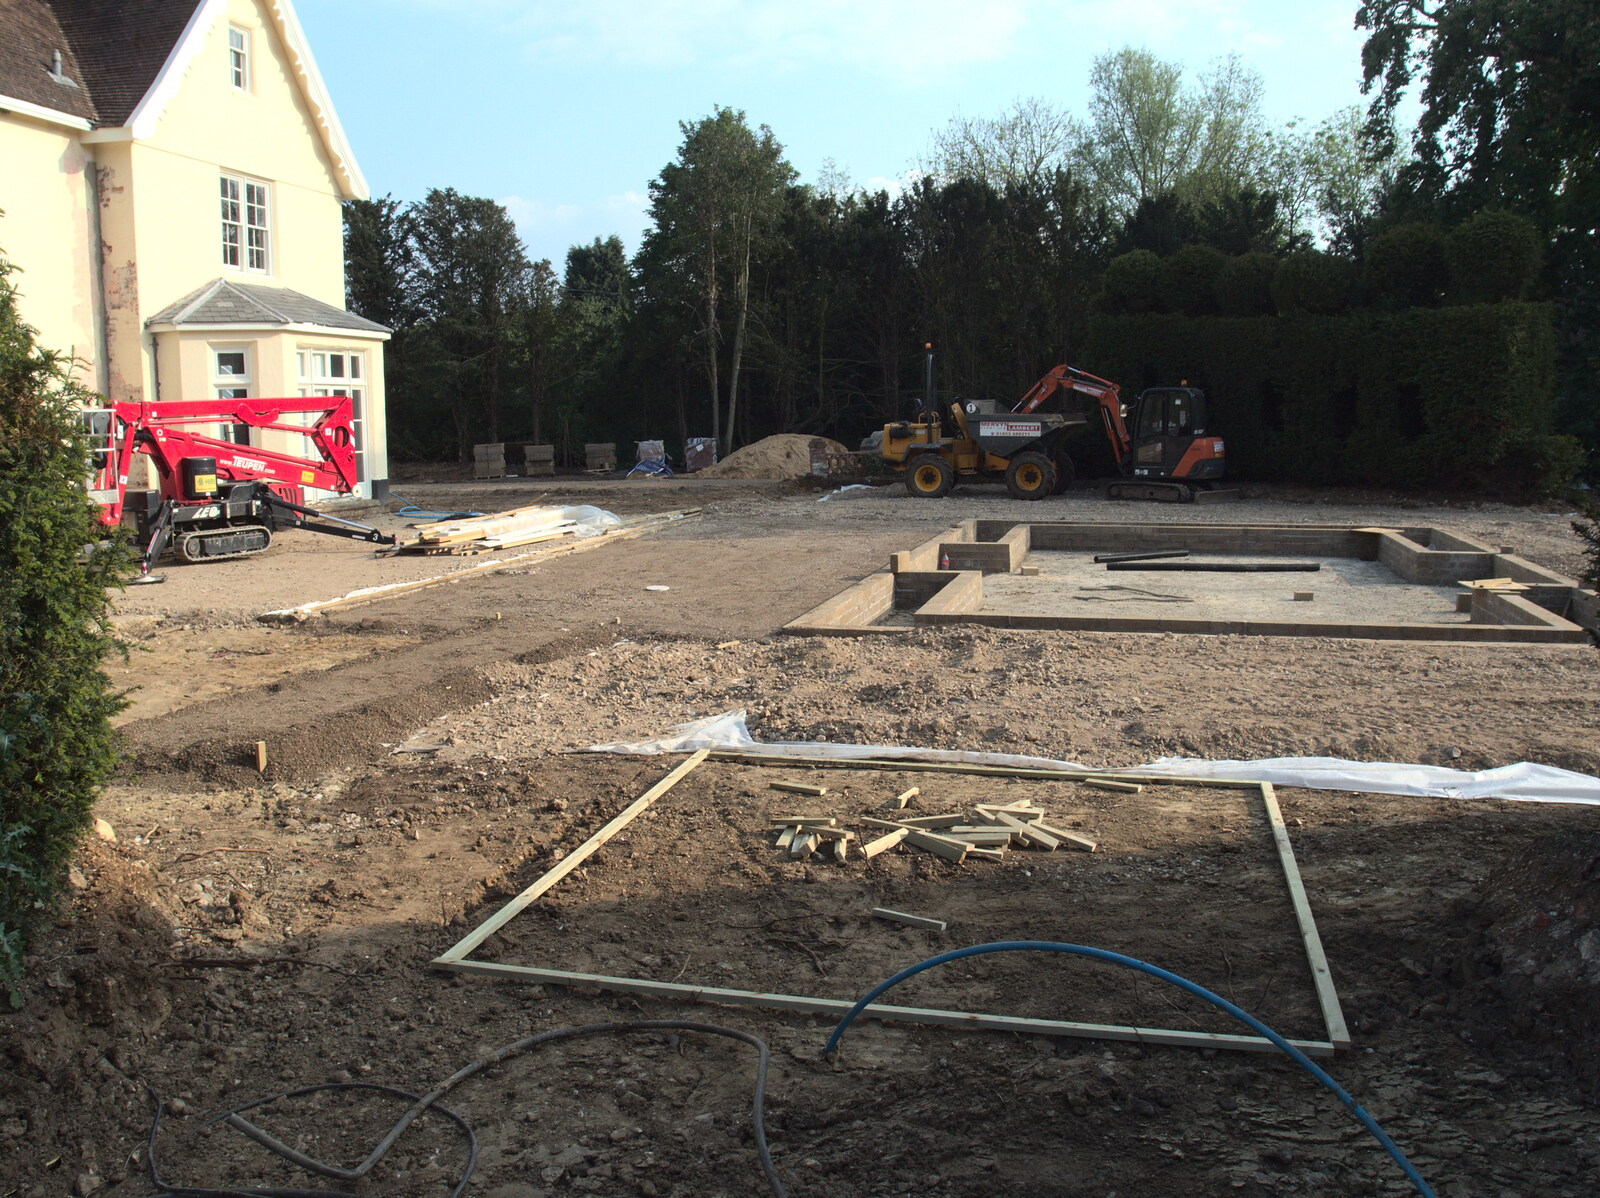 A new sunken patio is constructed from Thornham Four Horseshoes, and the Oaksmere, Brome, Suffolk - 17th May 2014